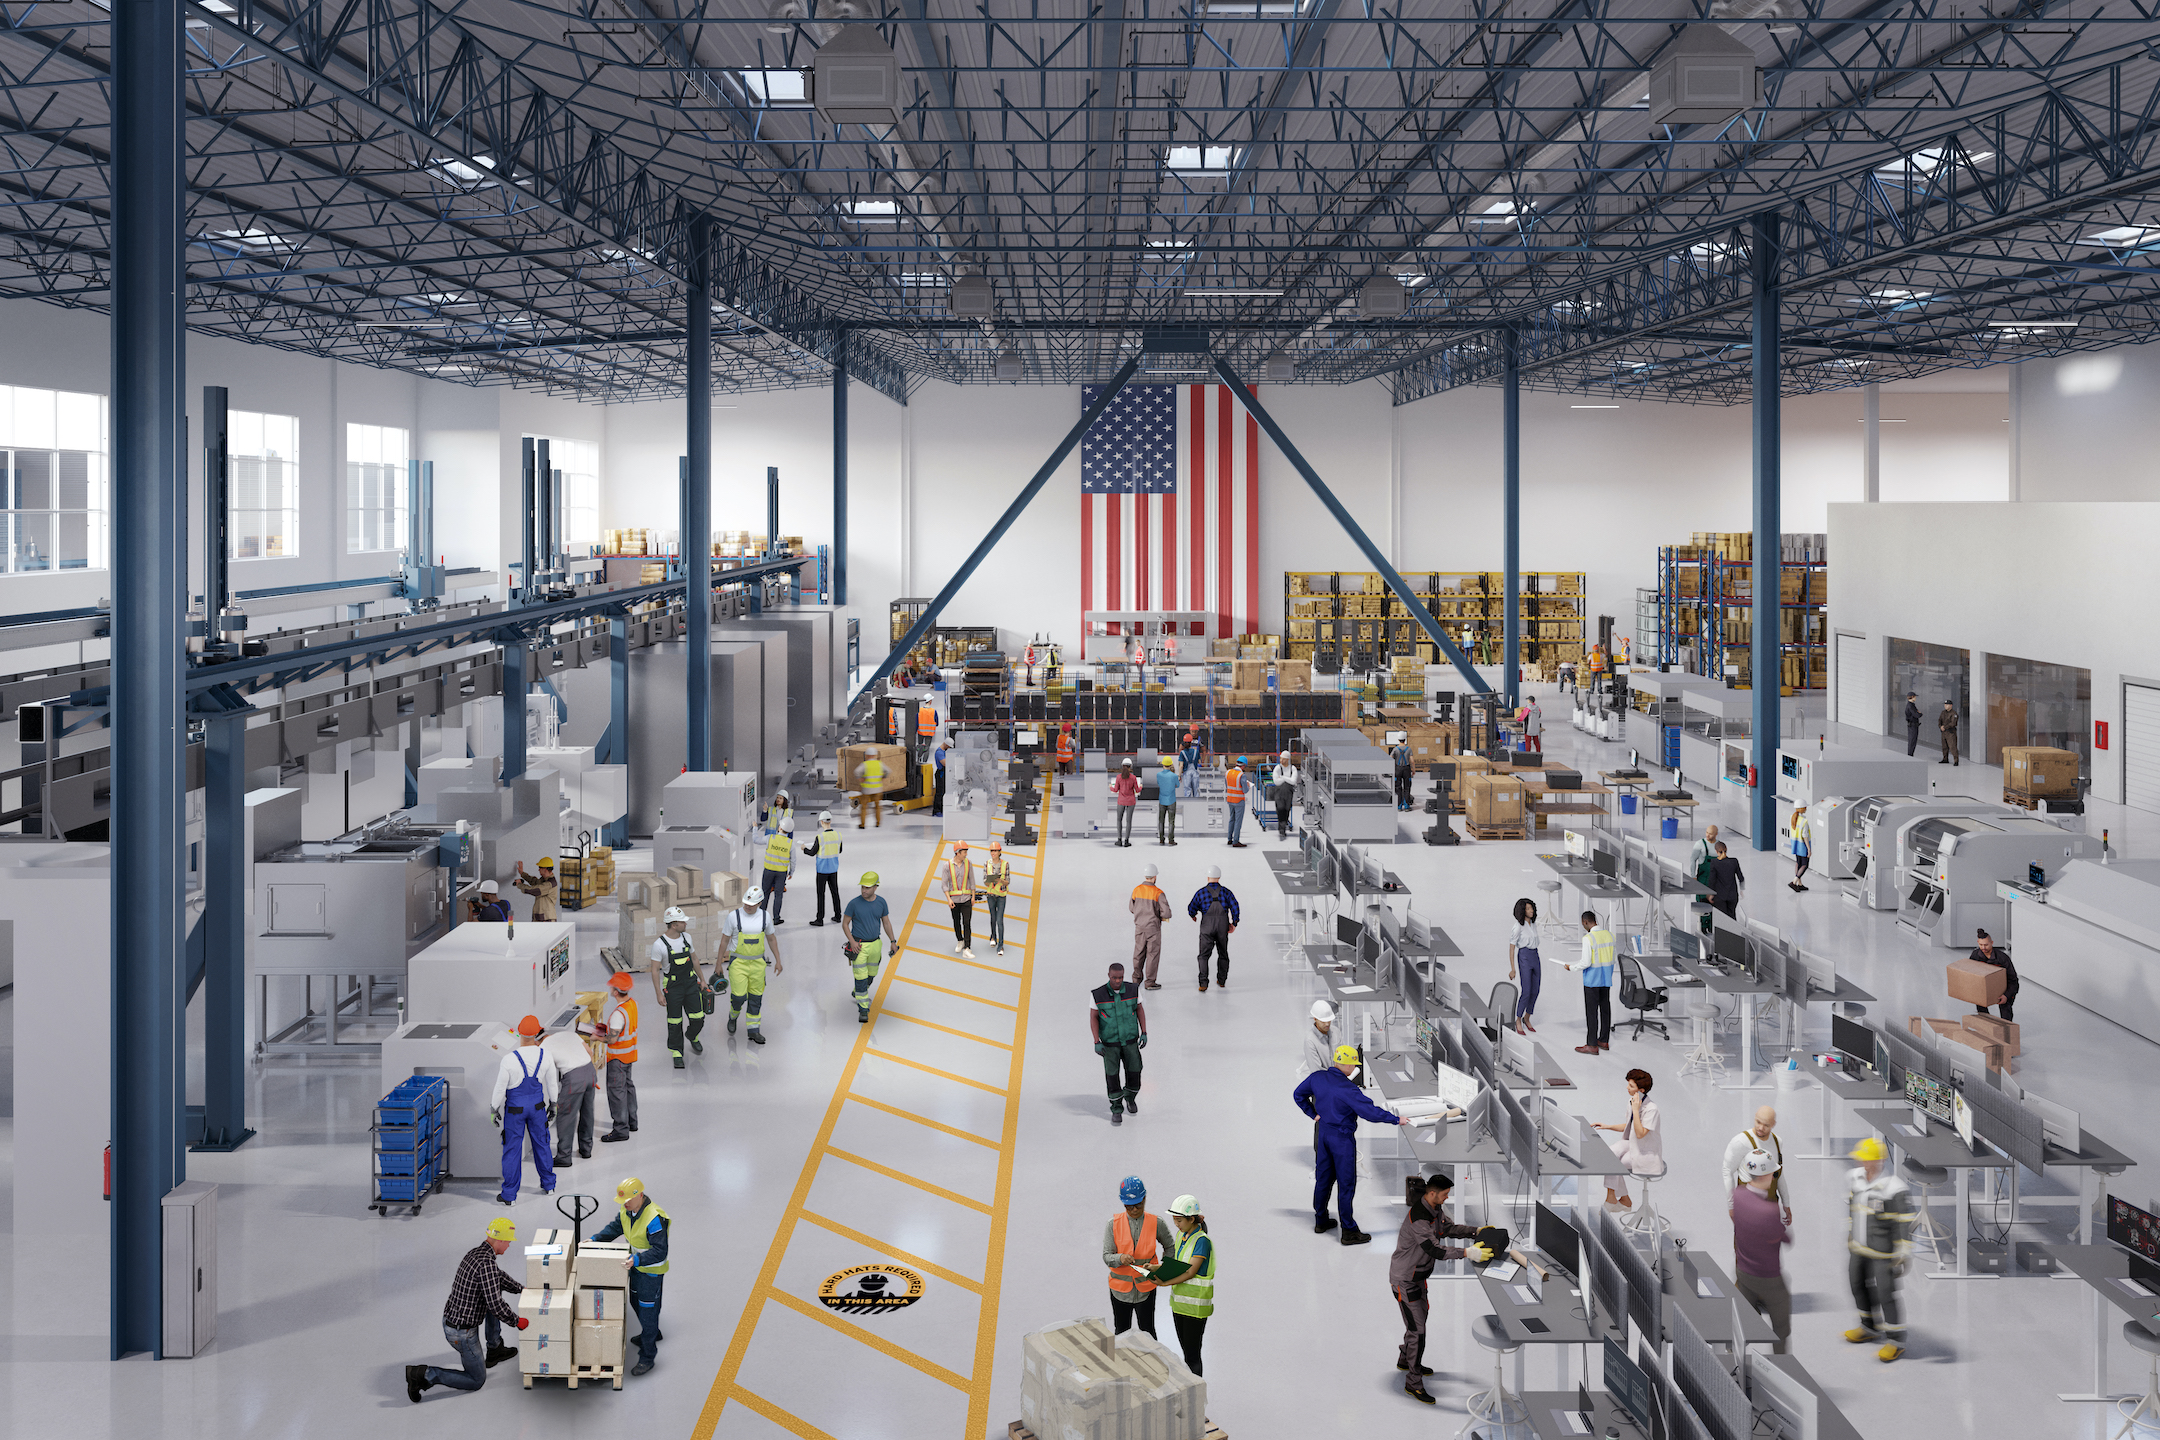 A busy factory floor with workers, machines, and a large American flag hanging in the background.